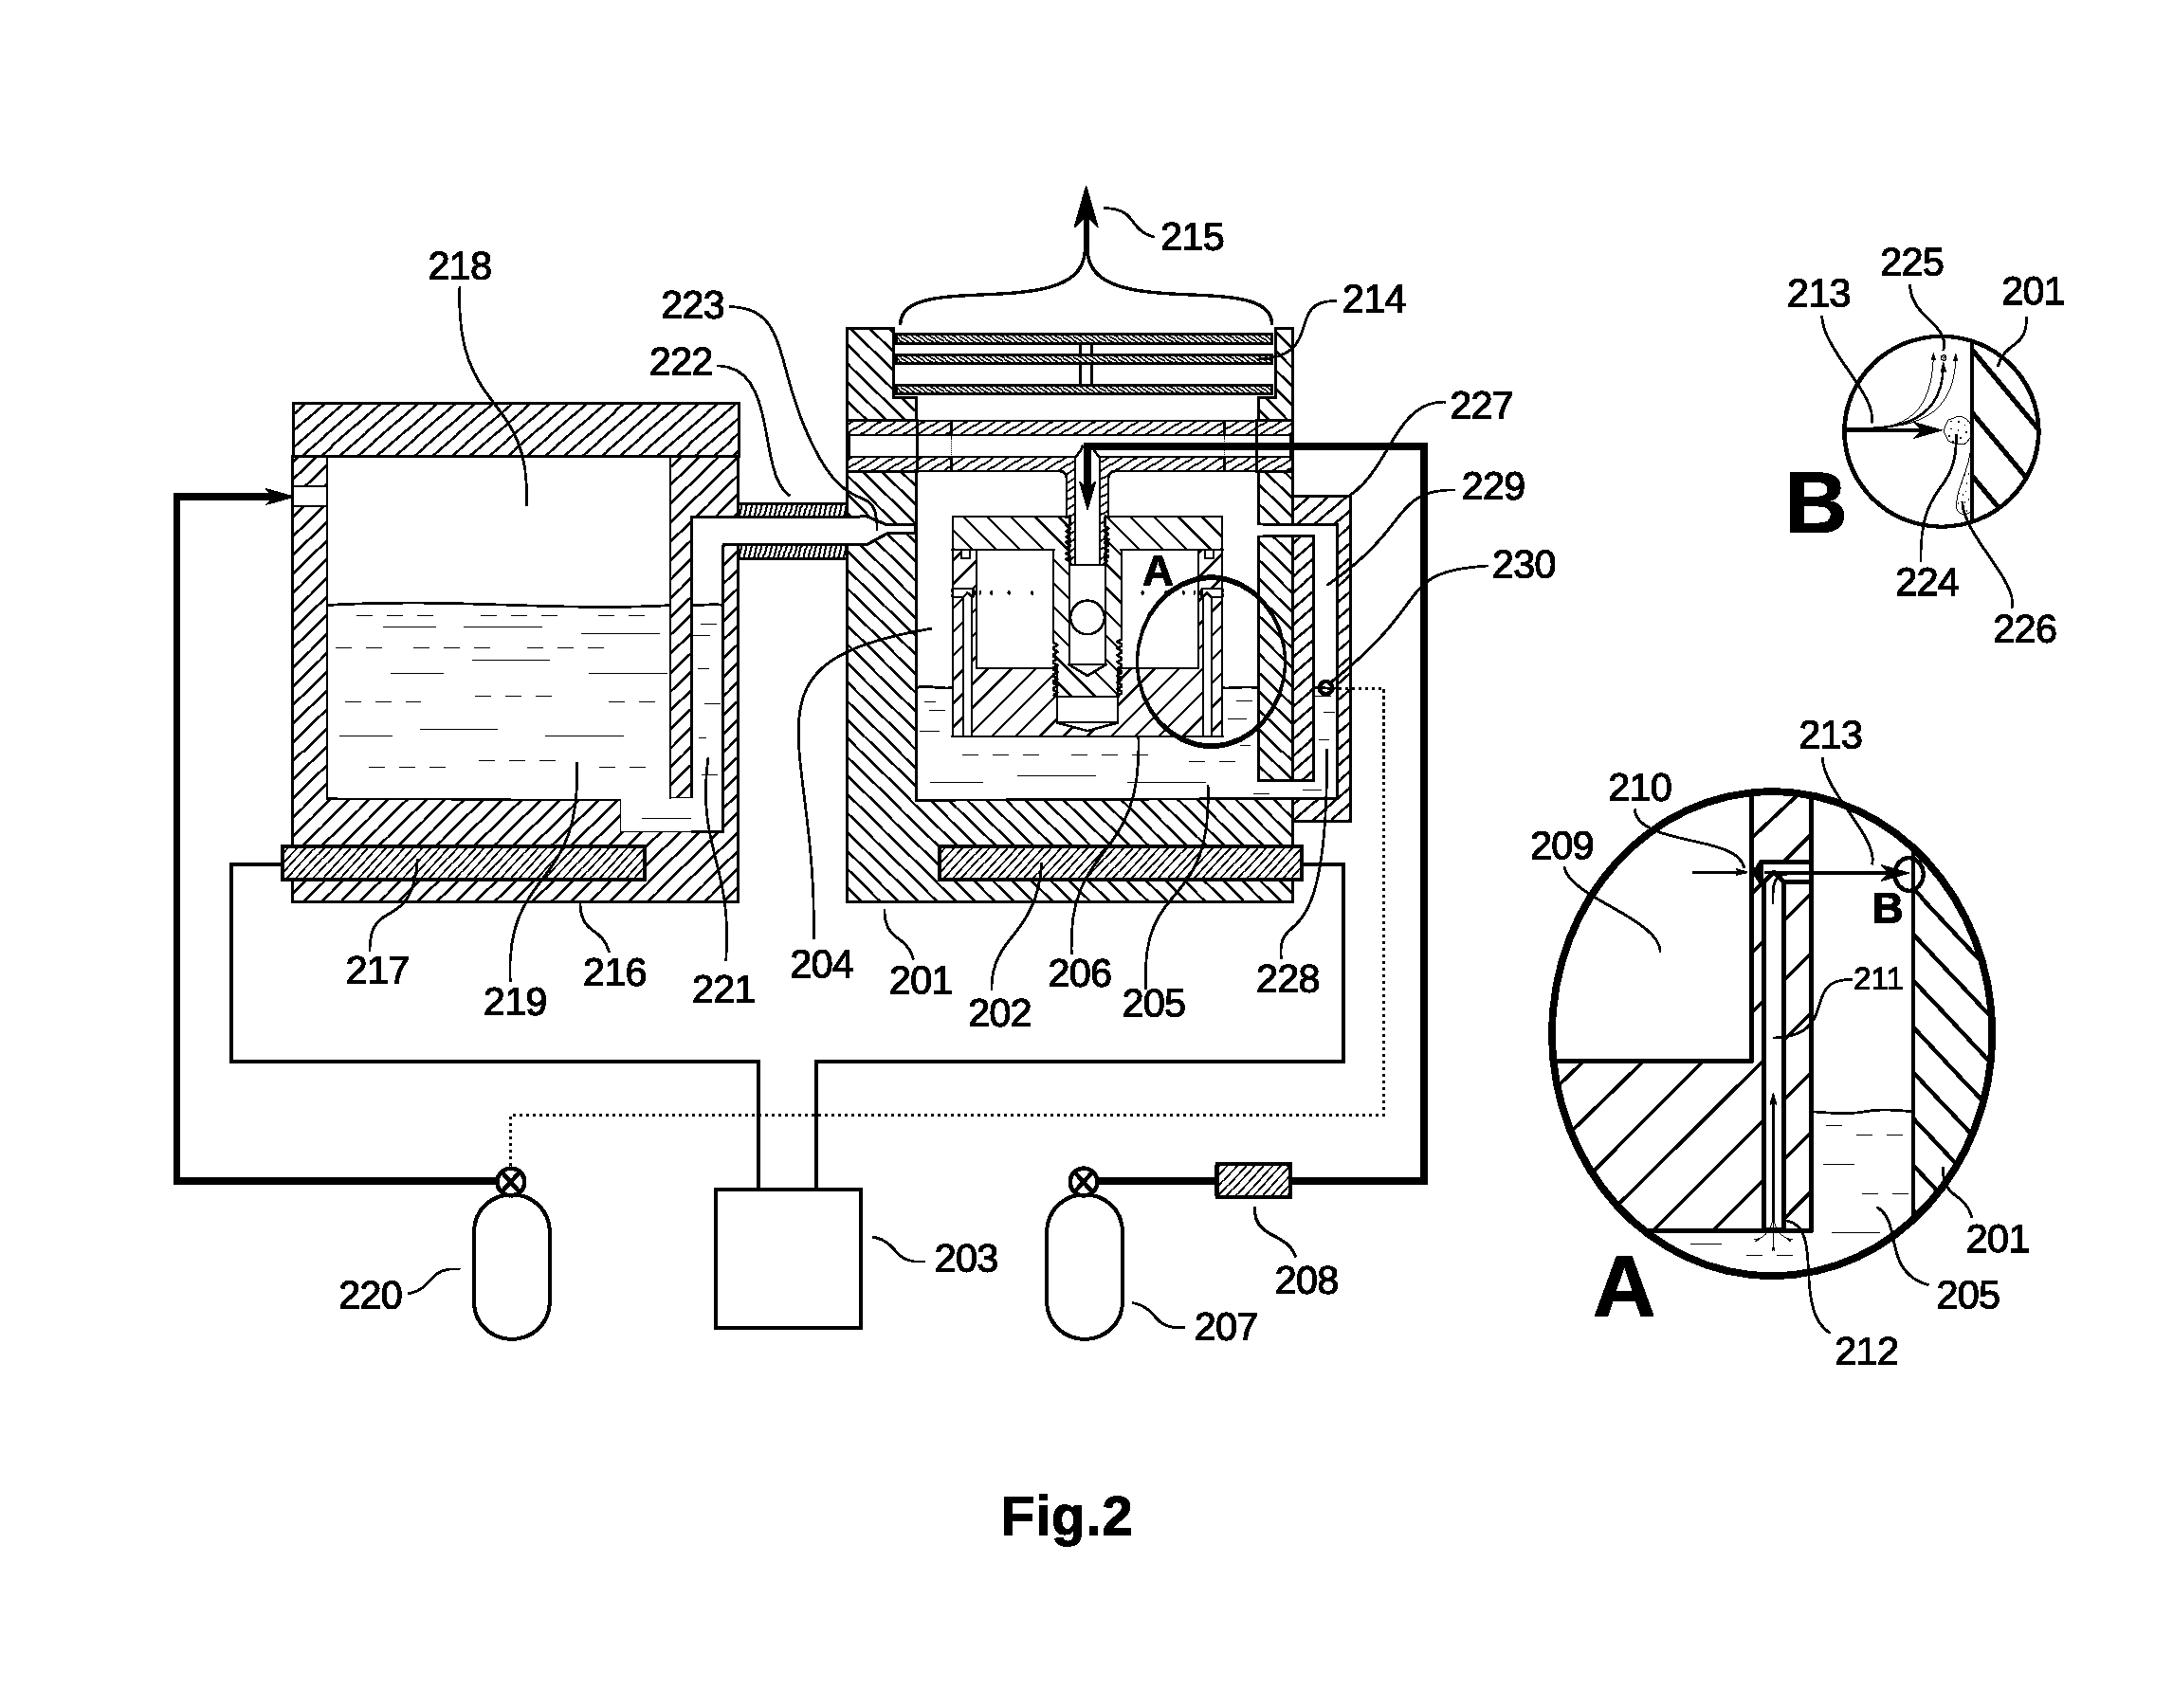 Apparatus and Process for Depositing a Thin Layer of Resist on a Substrate